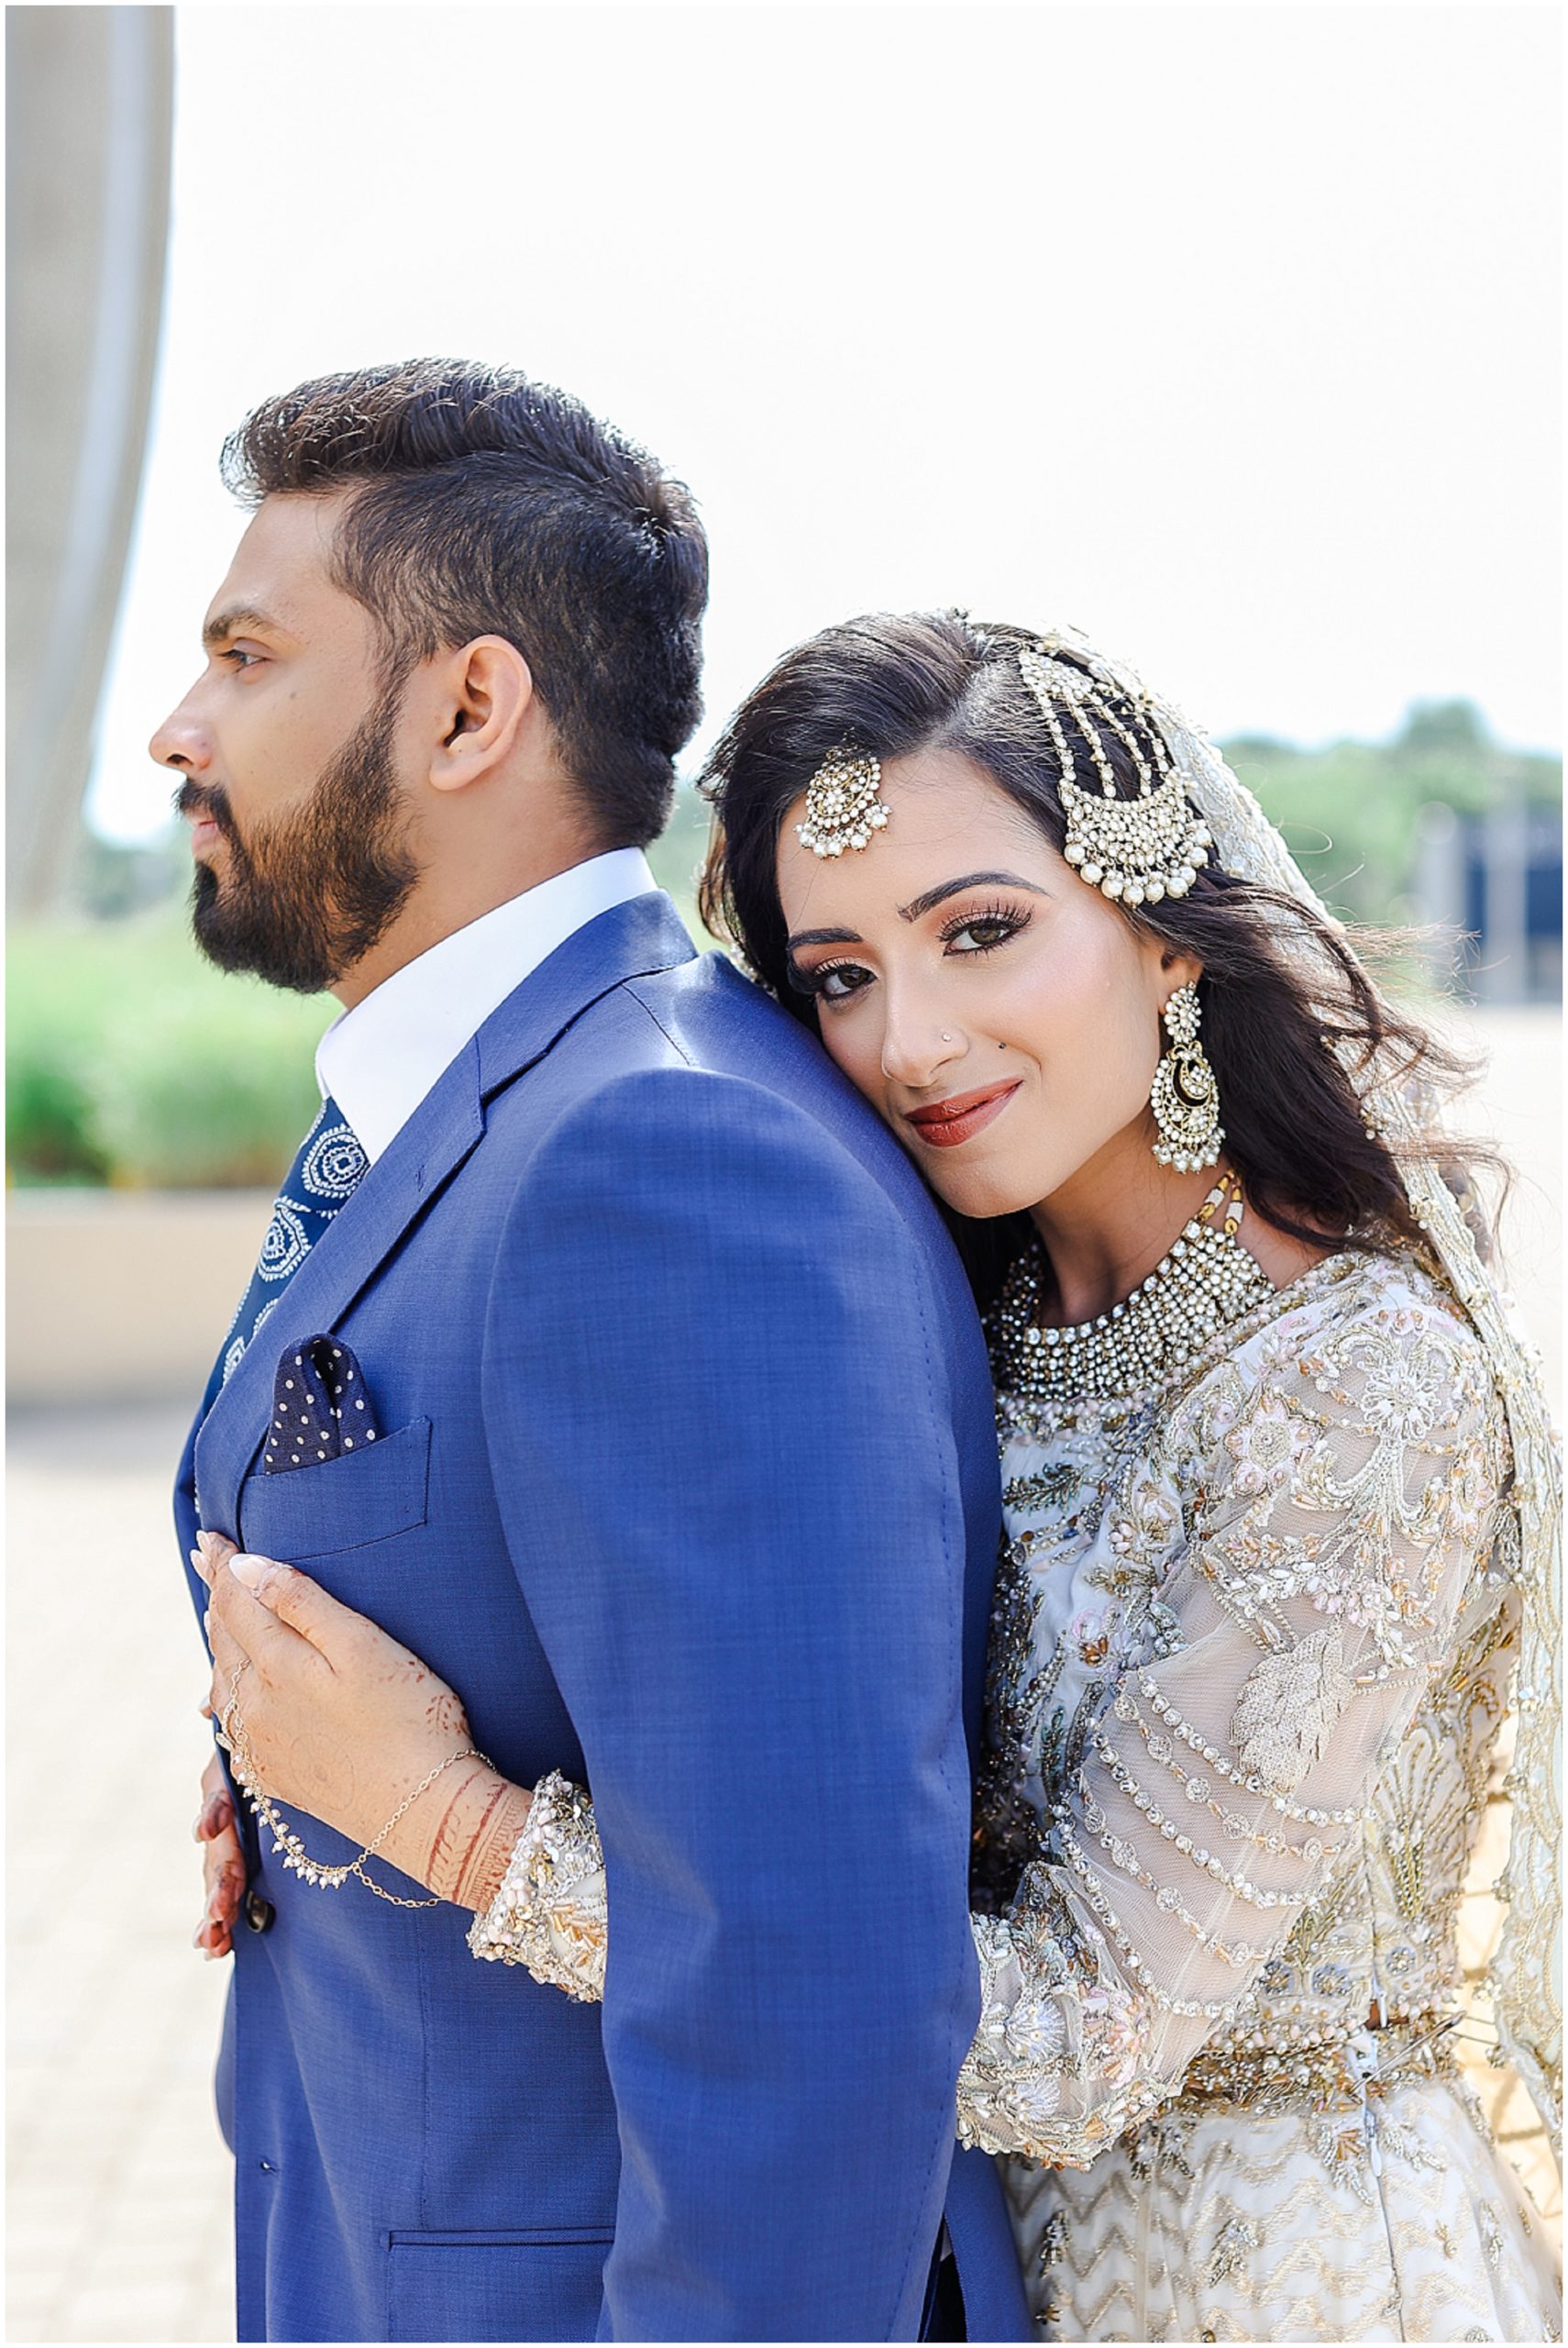 beautiful portrait ideas - wedding photo poses for pakistani and indian weddings and muslim bride - best photographer in st.louis stl and kansas city